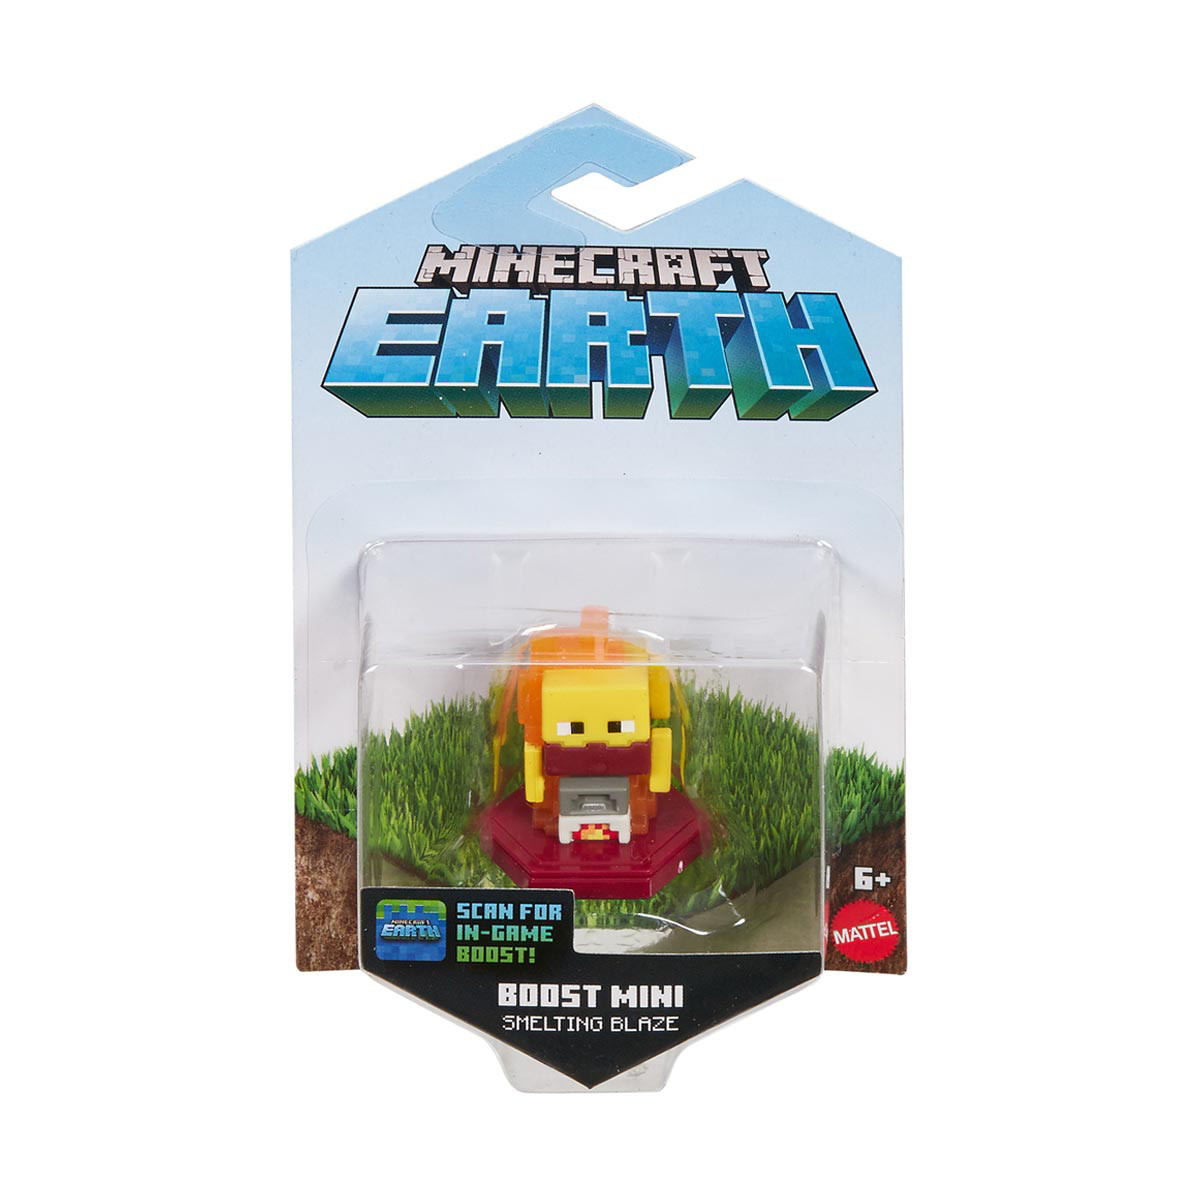 What Is Minecraft Earth?